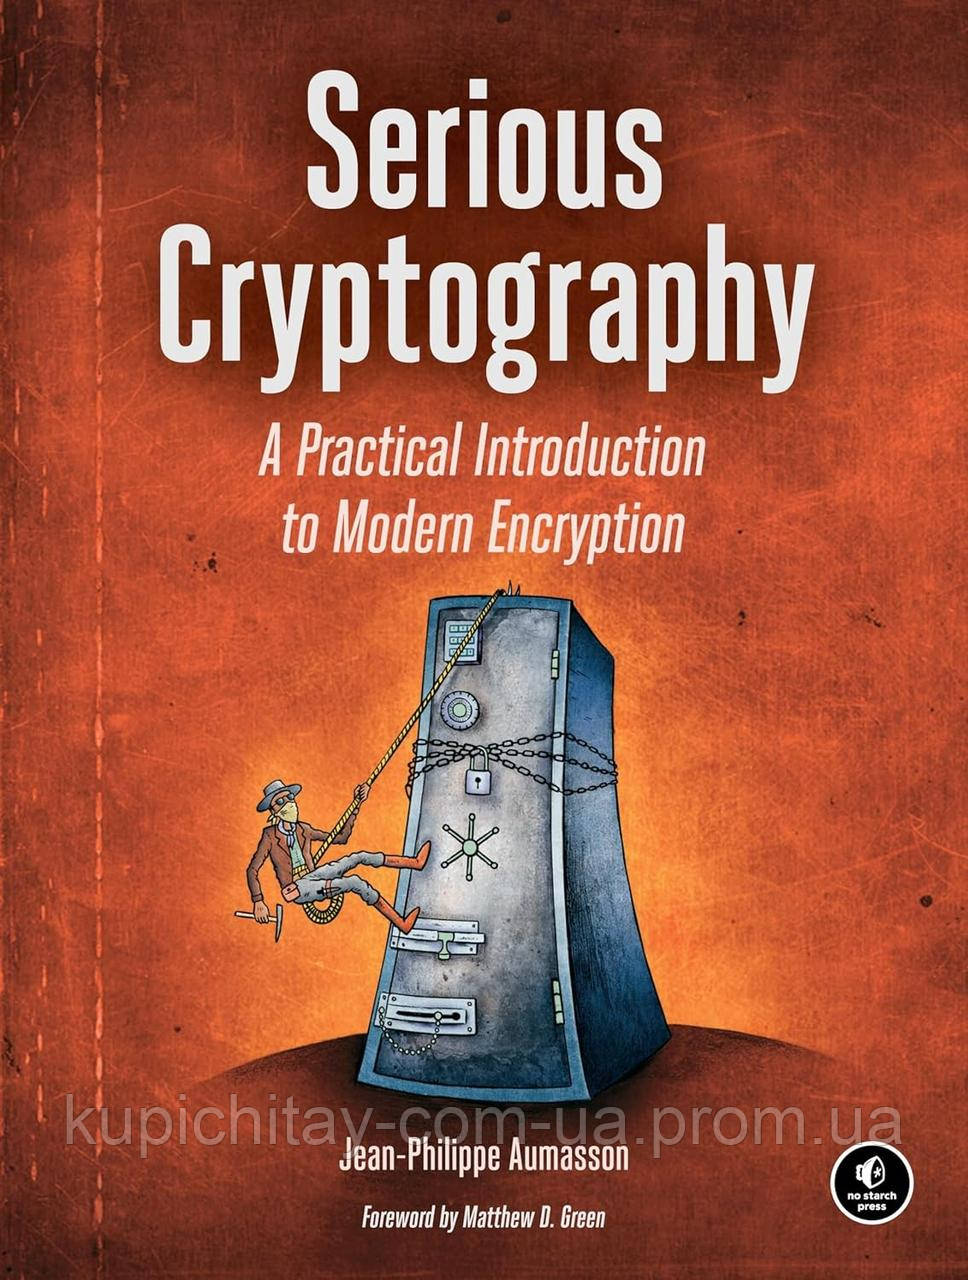 Serious Cryptography: A Practical Introduction to Modern Encryption, Jean-Philippe Aumasson